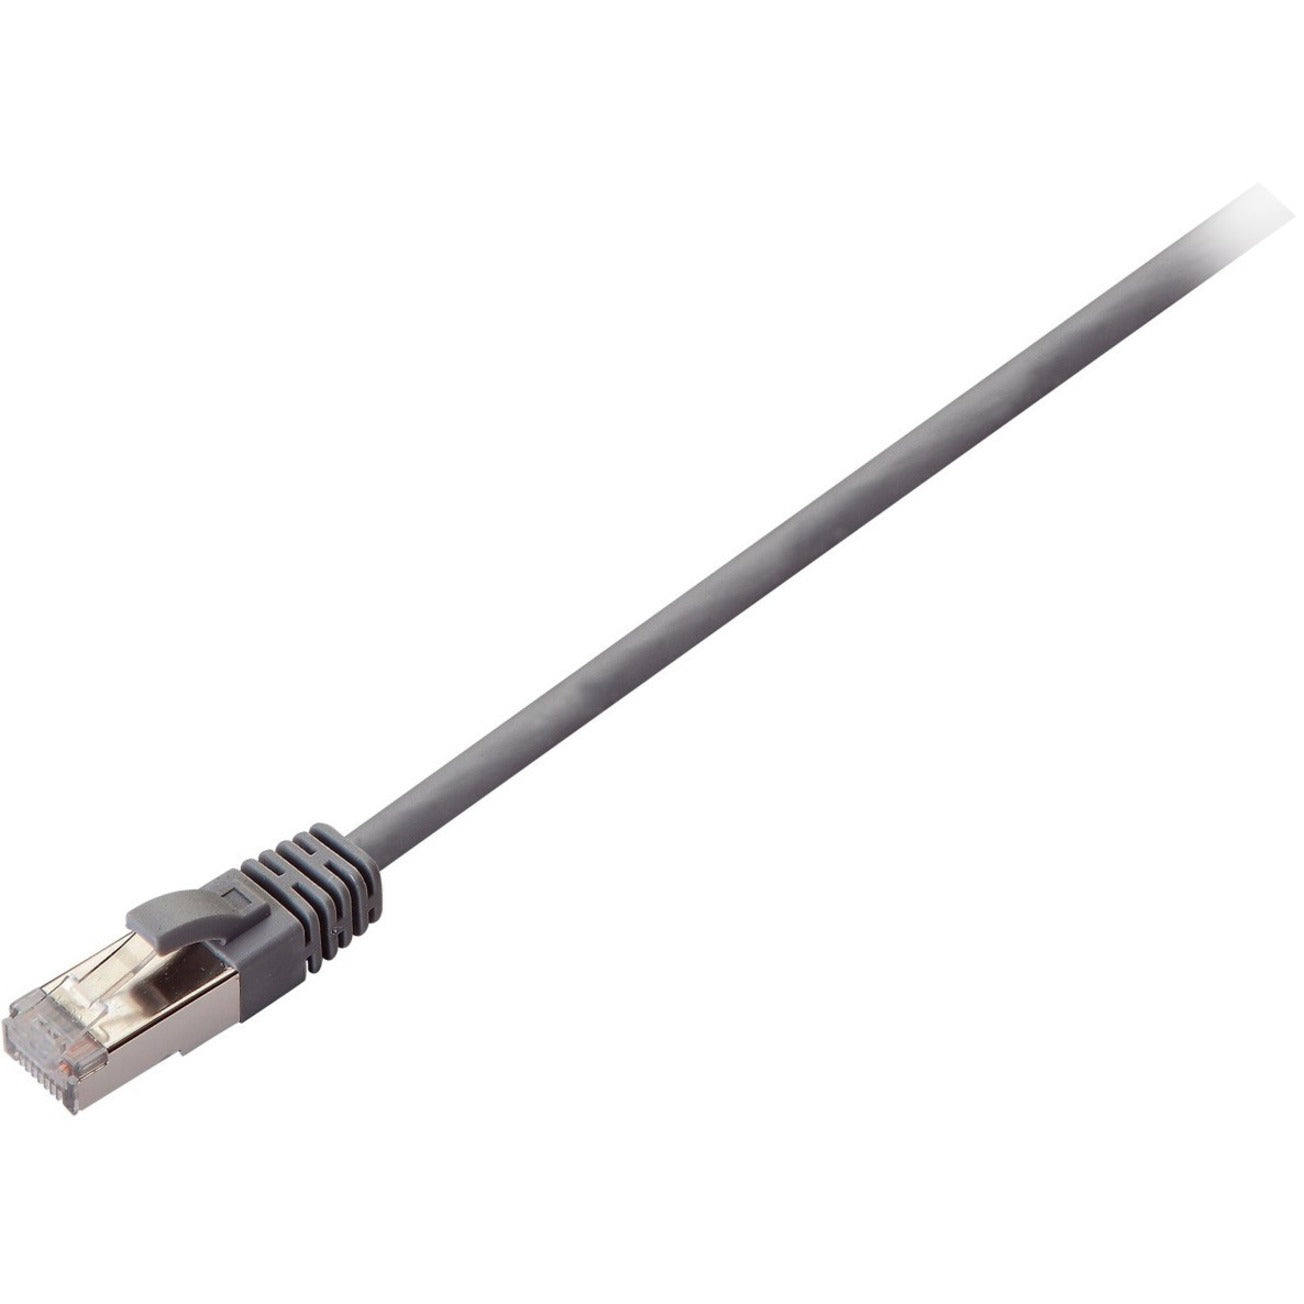 V7 V7CAT6STP-05M-GRY-1N Grey Cat6 Shielded (STP) Cable RJ45 Male to RJ45 Male 5m 16.4ft, Strain Relief, Locking Latch, Crosstalk Protection, Noise Reducing